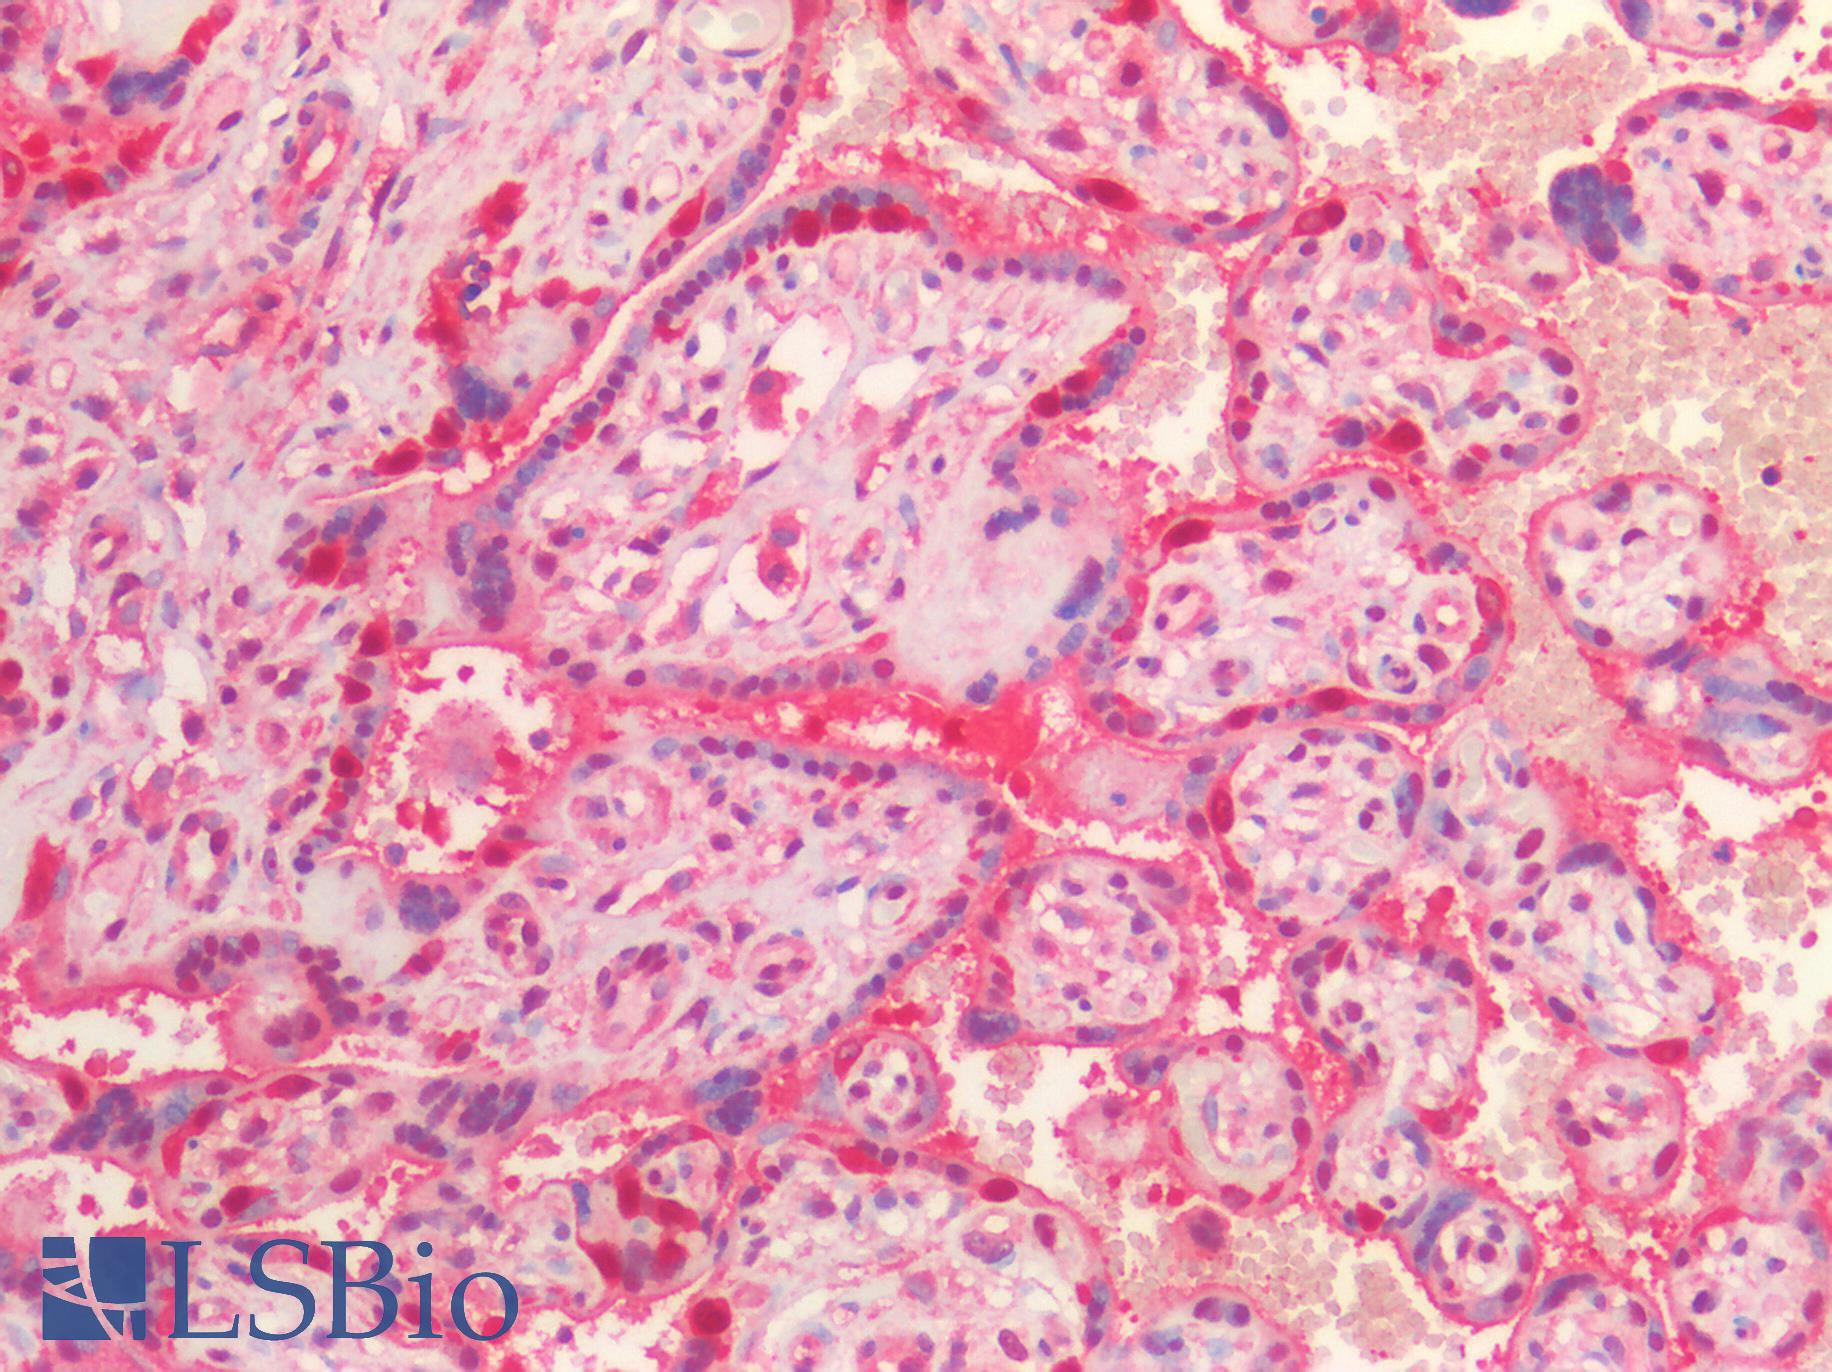 VCP Antibody - Human Placenta: Formalin-Fixed, Paraffin-Embedded (FFPE)